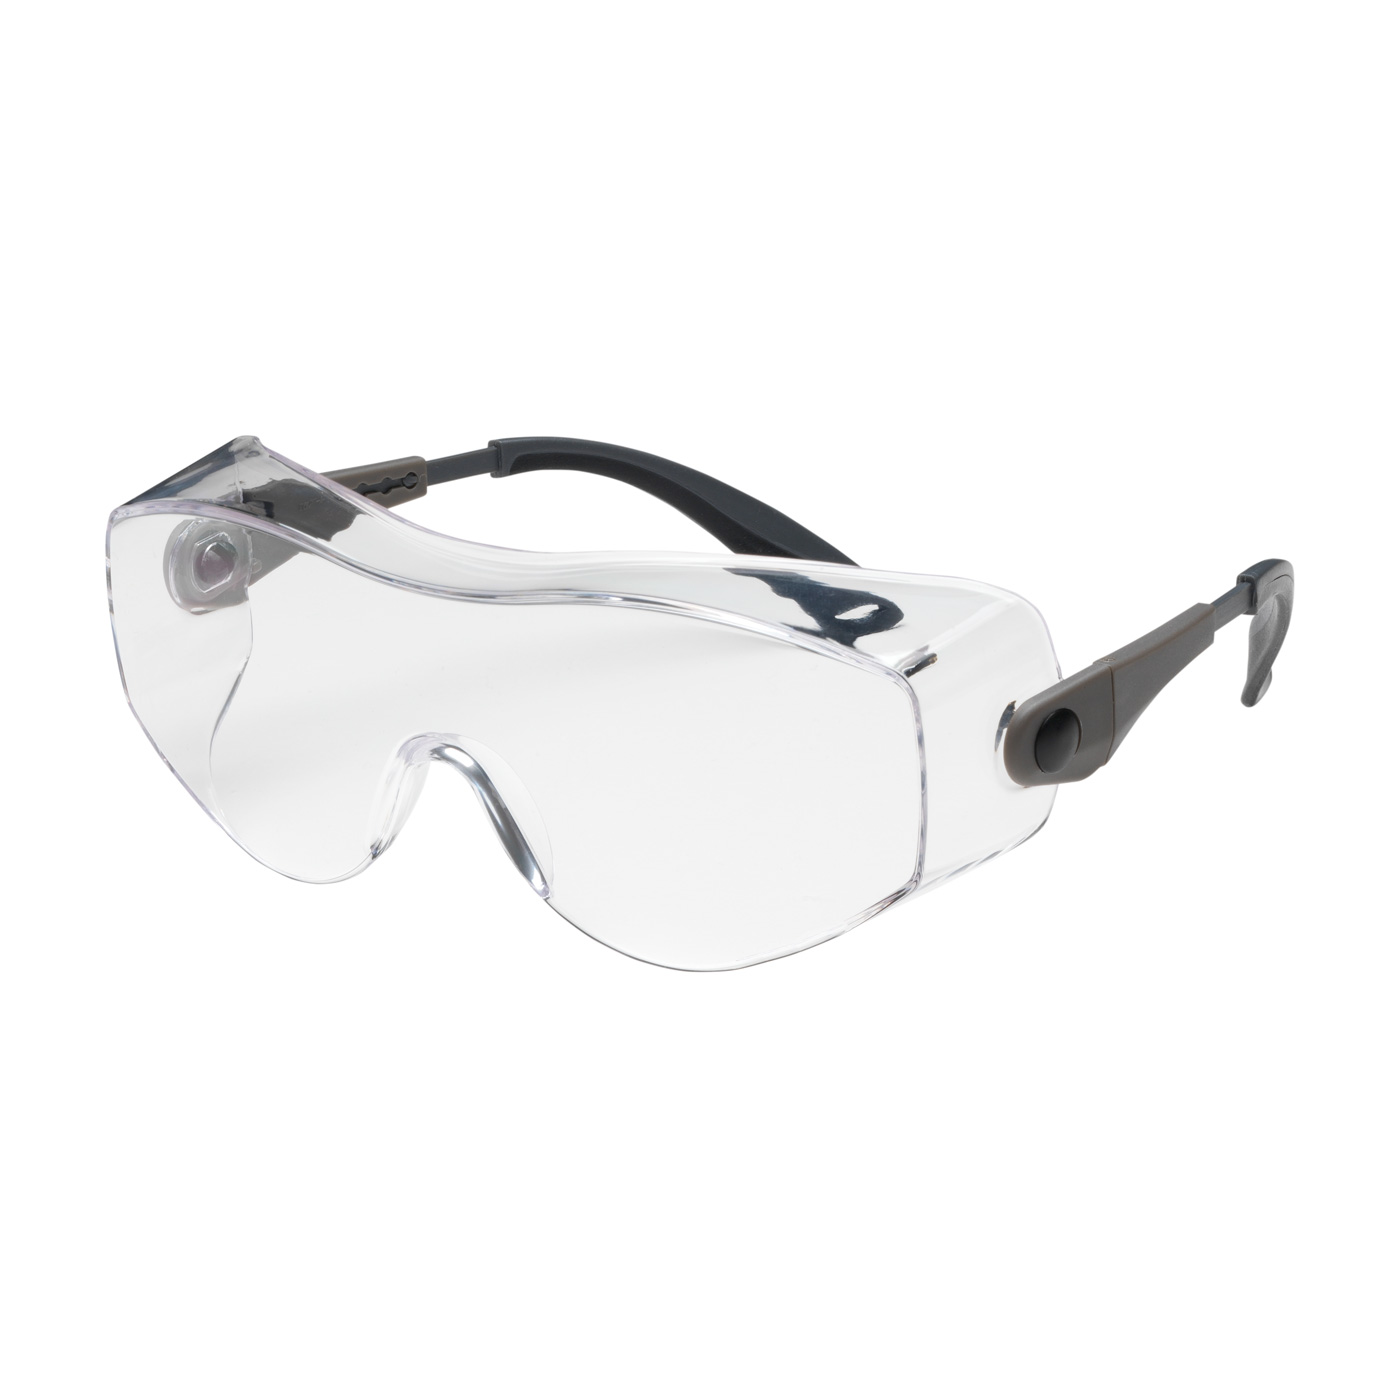 #250-98-0020 PIP OverSite™ OTG Rimless Safety Glasses with Black / Gray Temple, Clear Lens and Anti-Scratch/Fog Coating